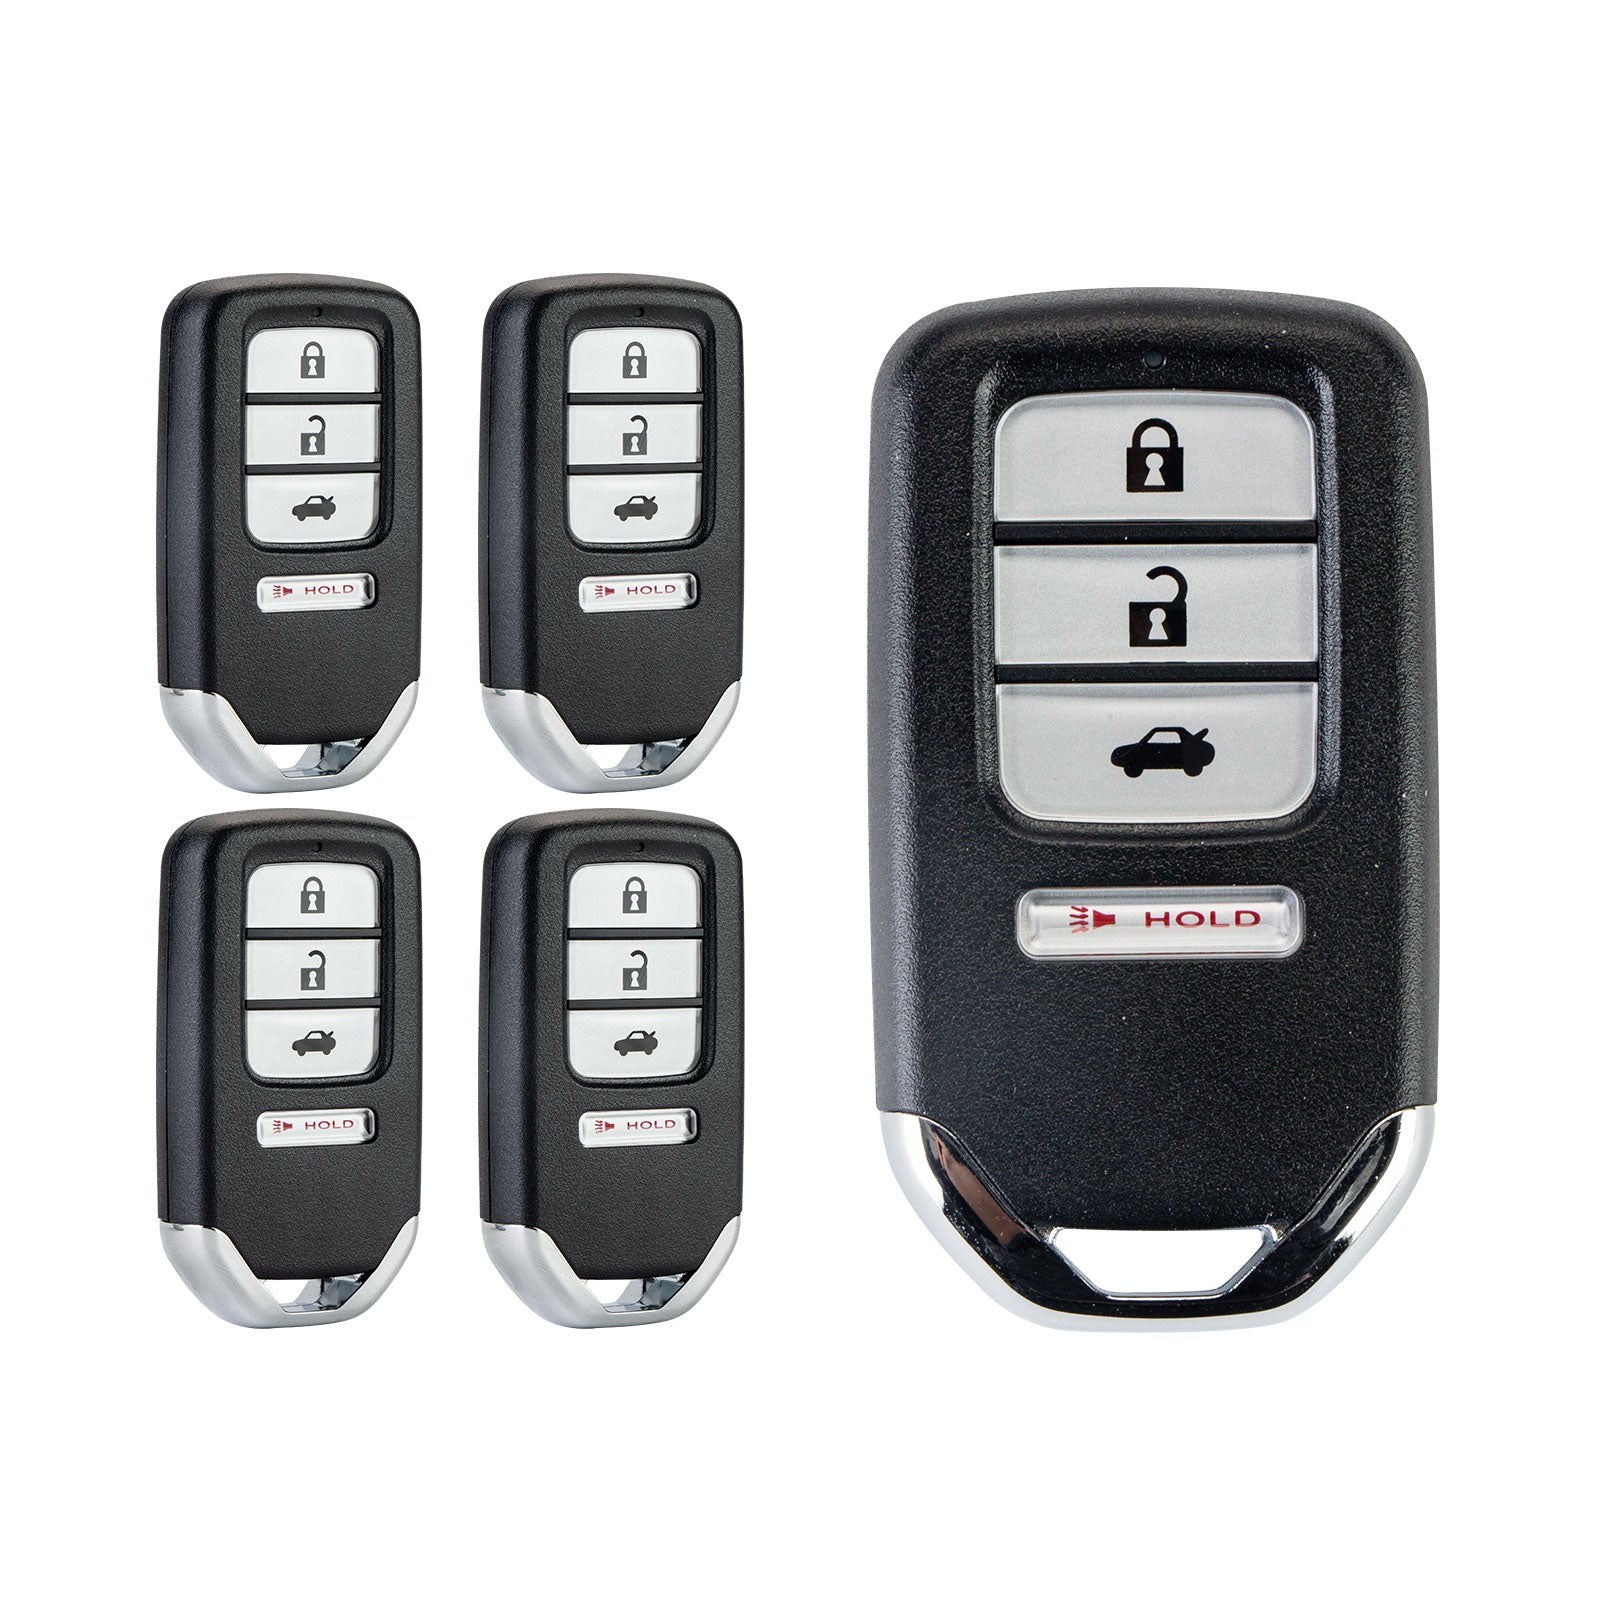 433MHZ Repalcement for 2018-2021 Honda Accord LX LX-S Sport 4A Chip Smart Remote Key Fob 72147-TVA-A11  KR-H4RH-05